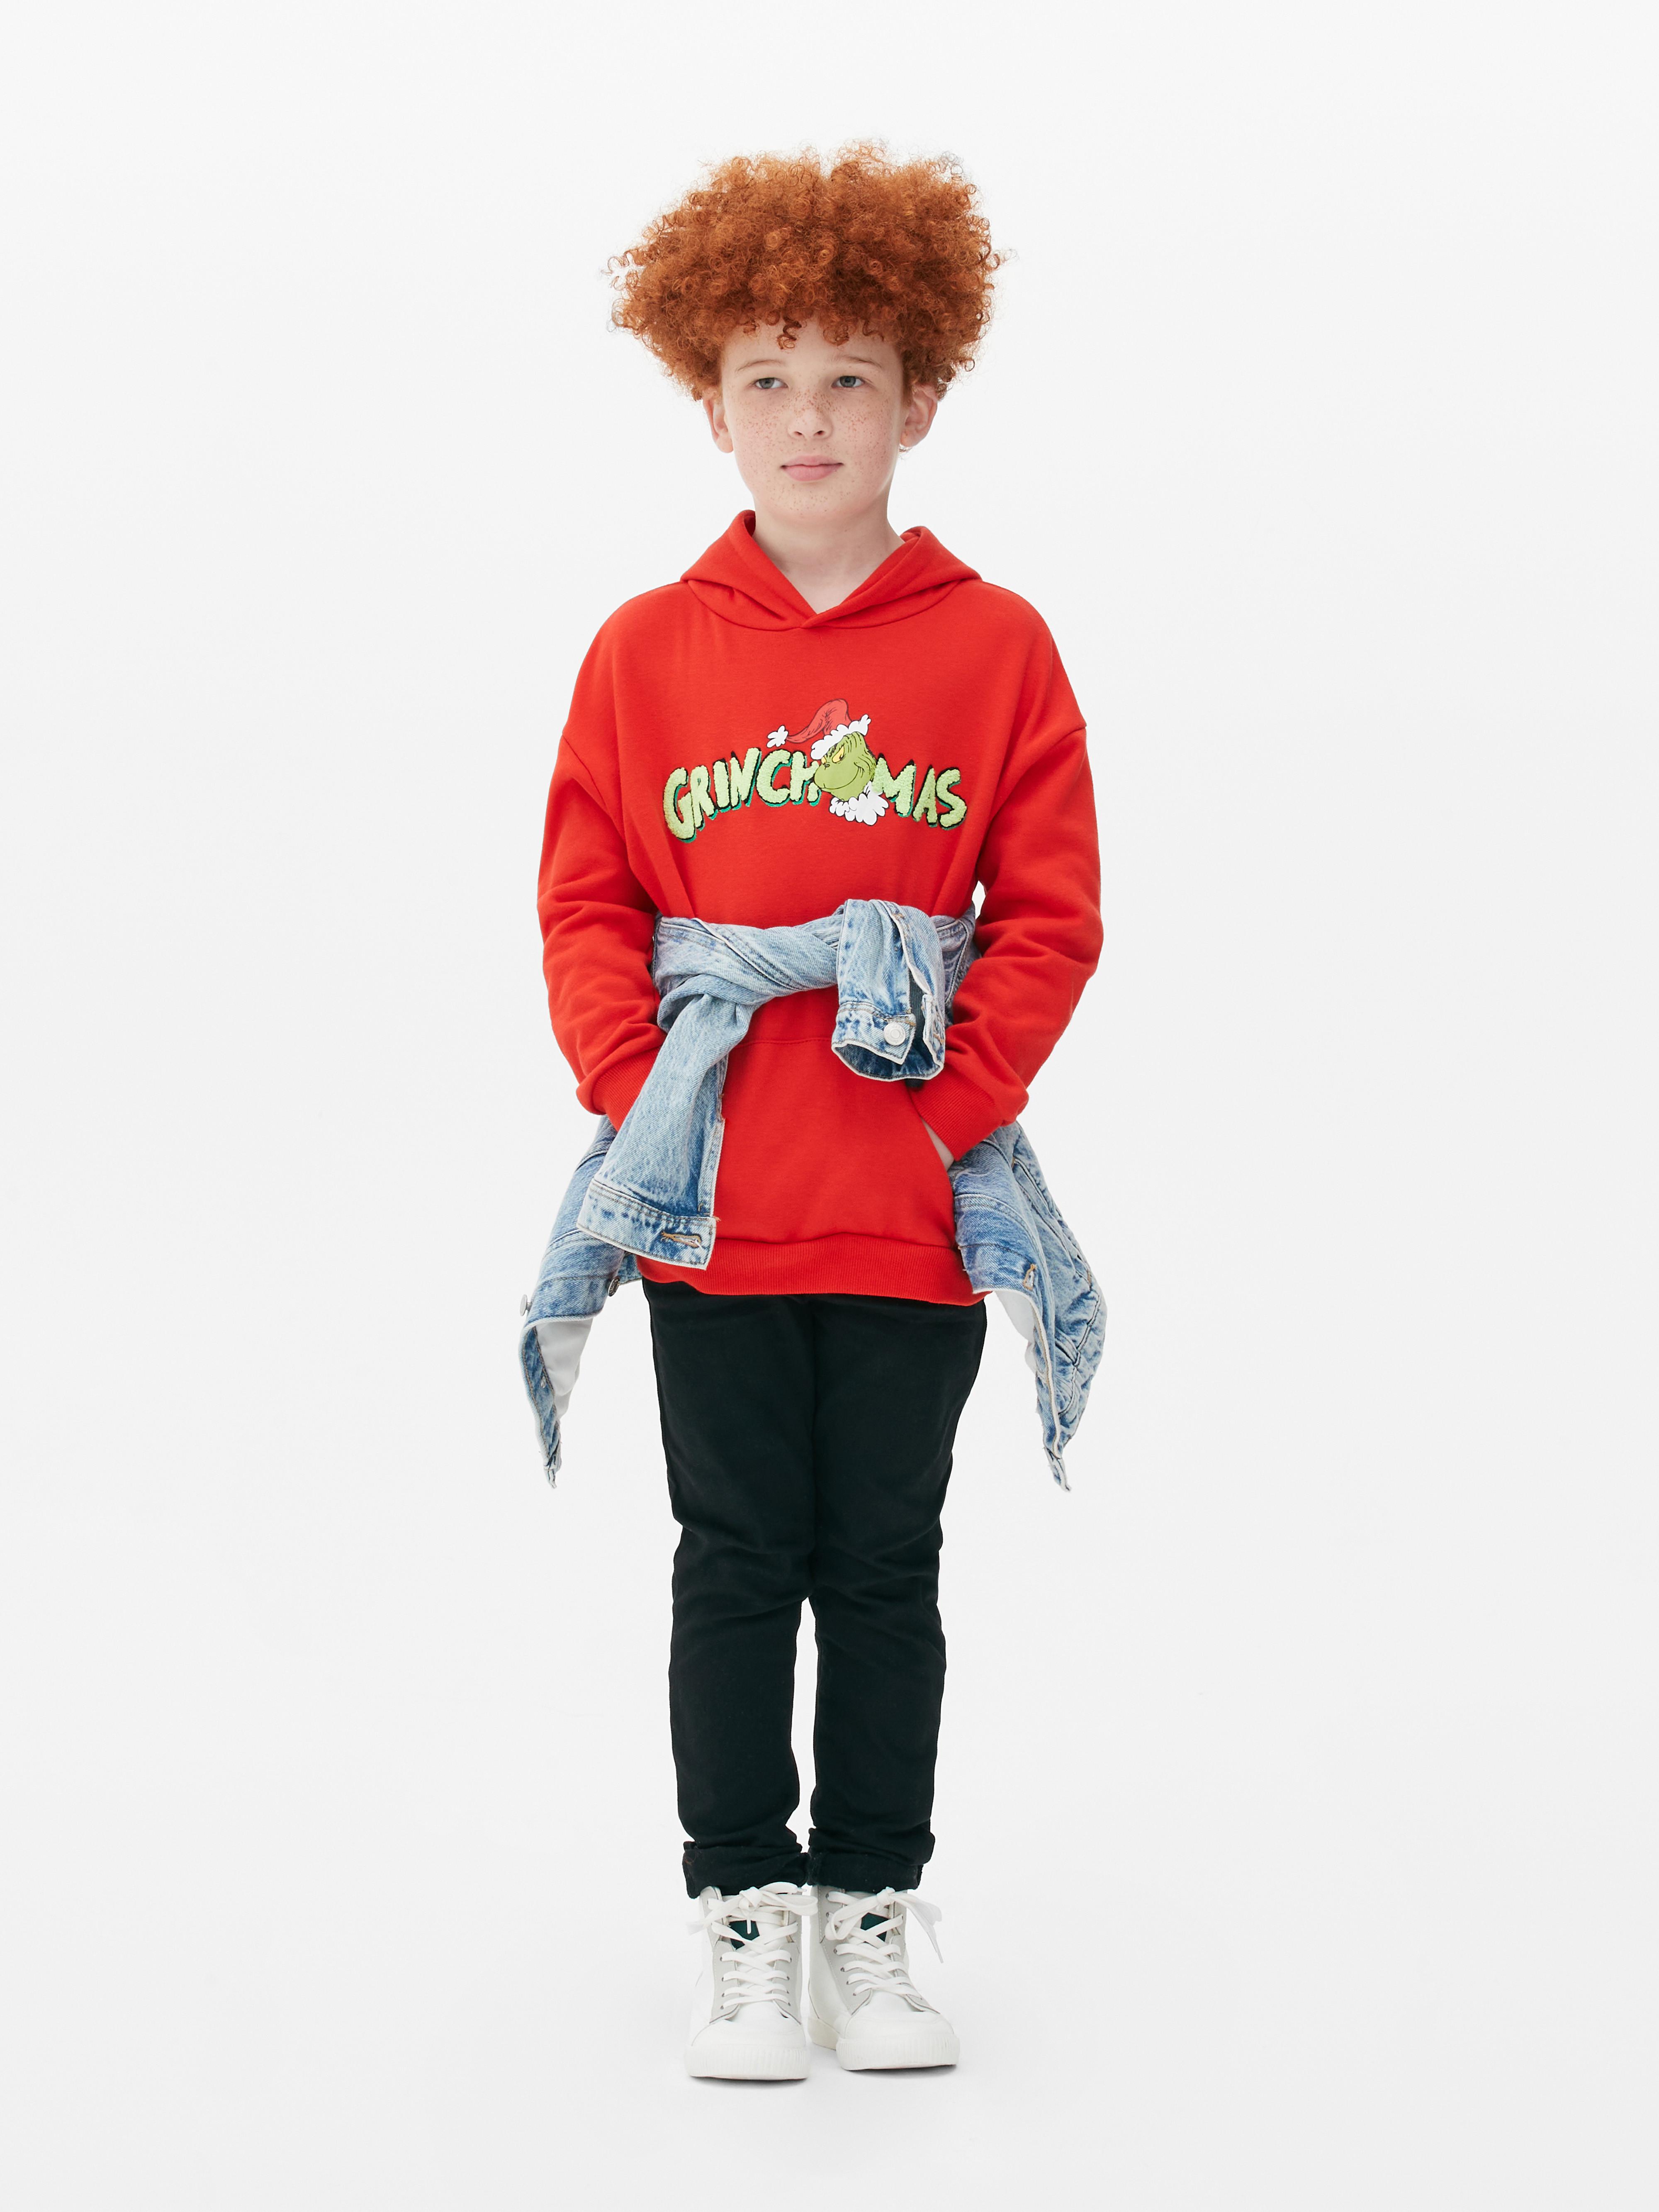 The Grinch Christmas Hoodie